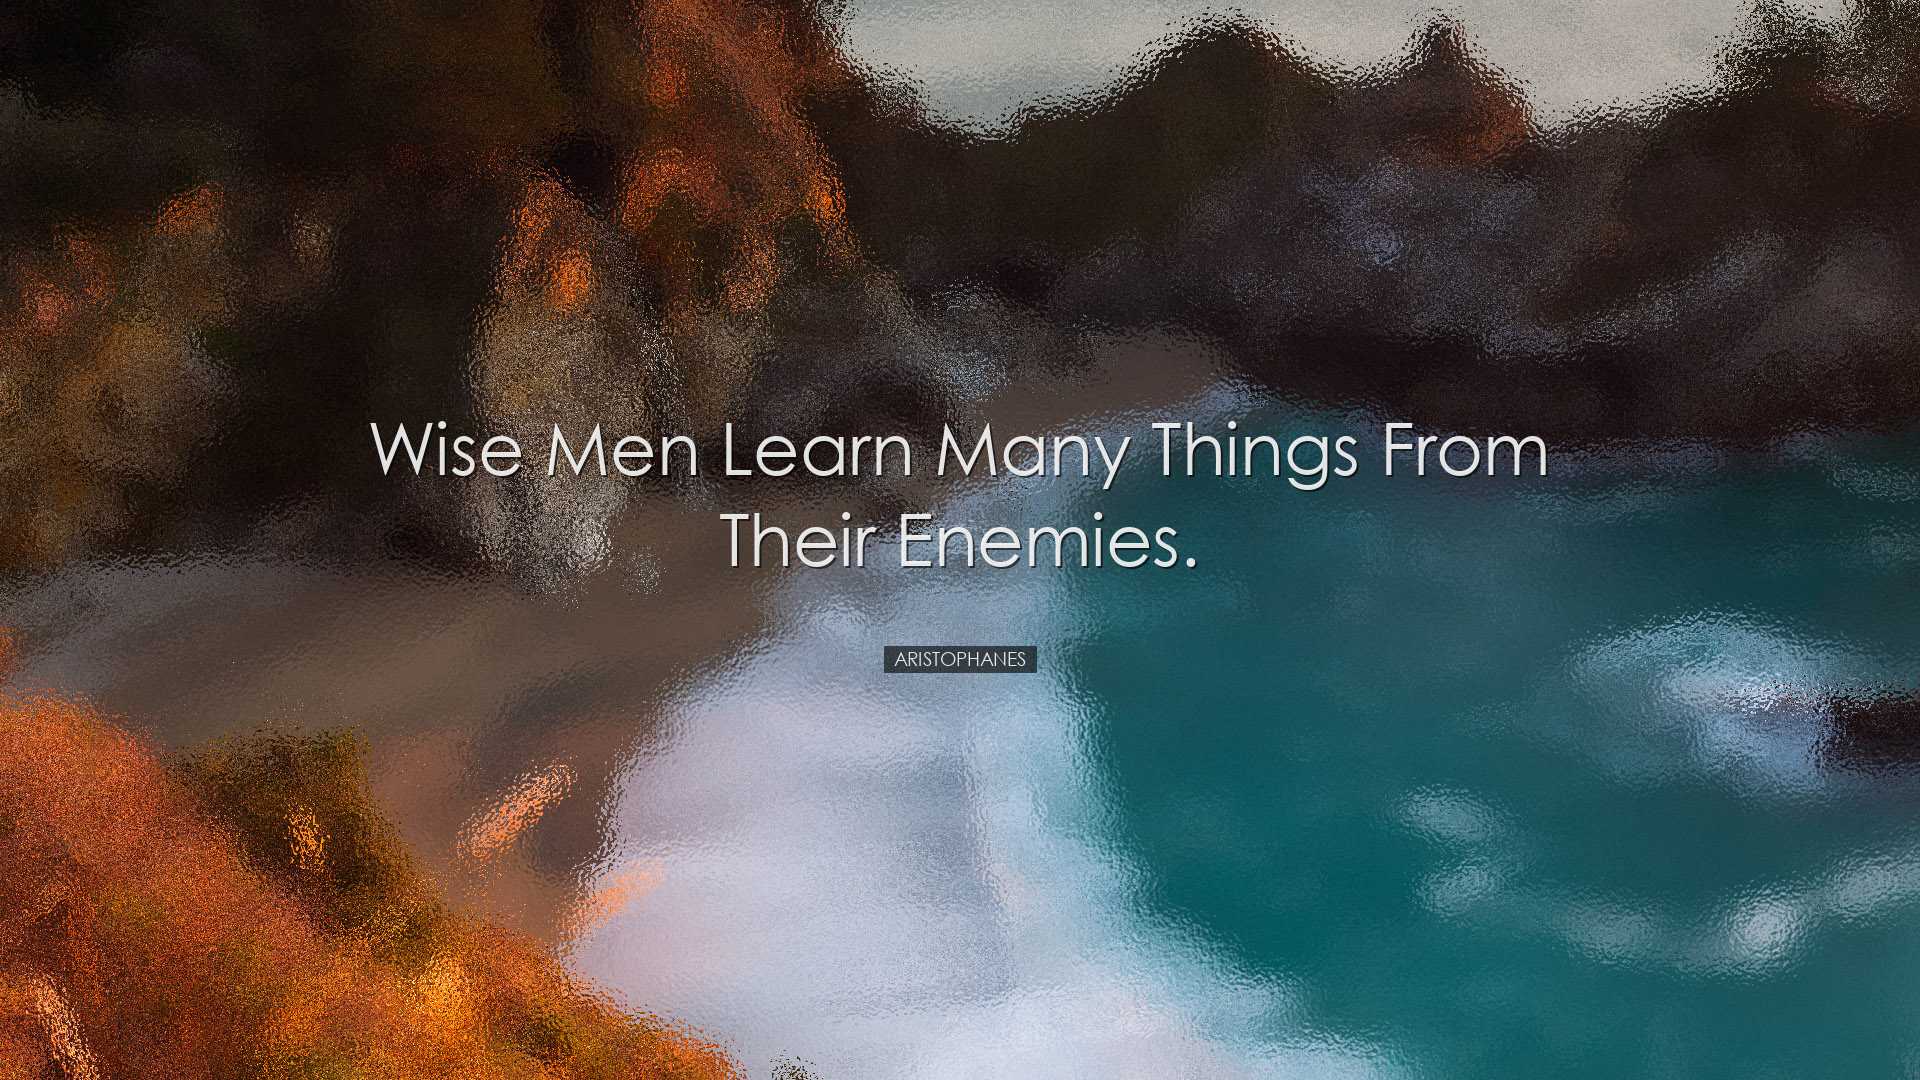 Wise men learn many things from their enemies. - Aristophanes